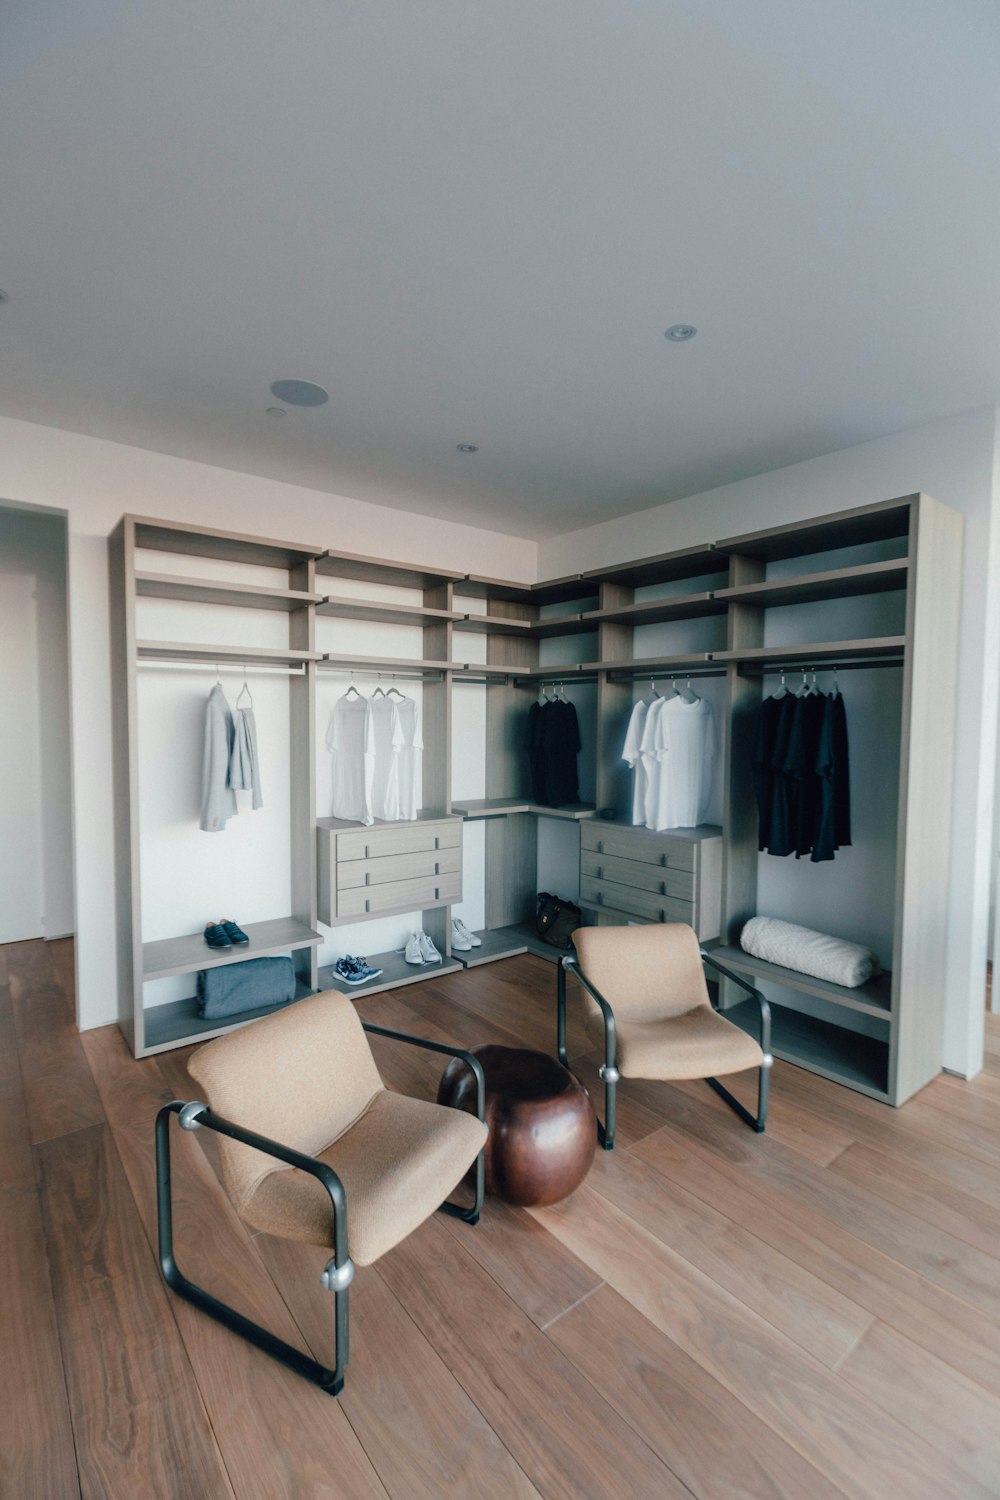 Luxury Closet Pictures  Download Free Images on Unsplash